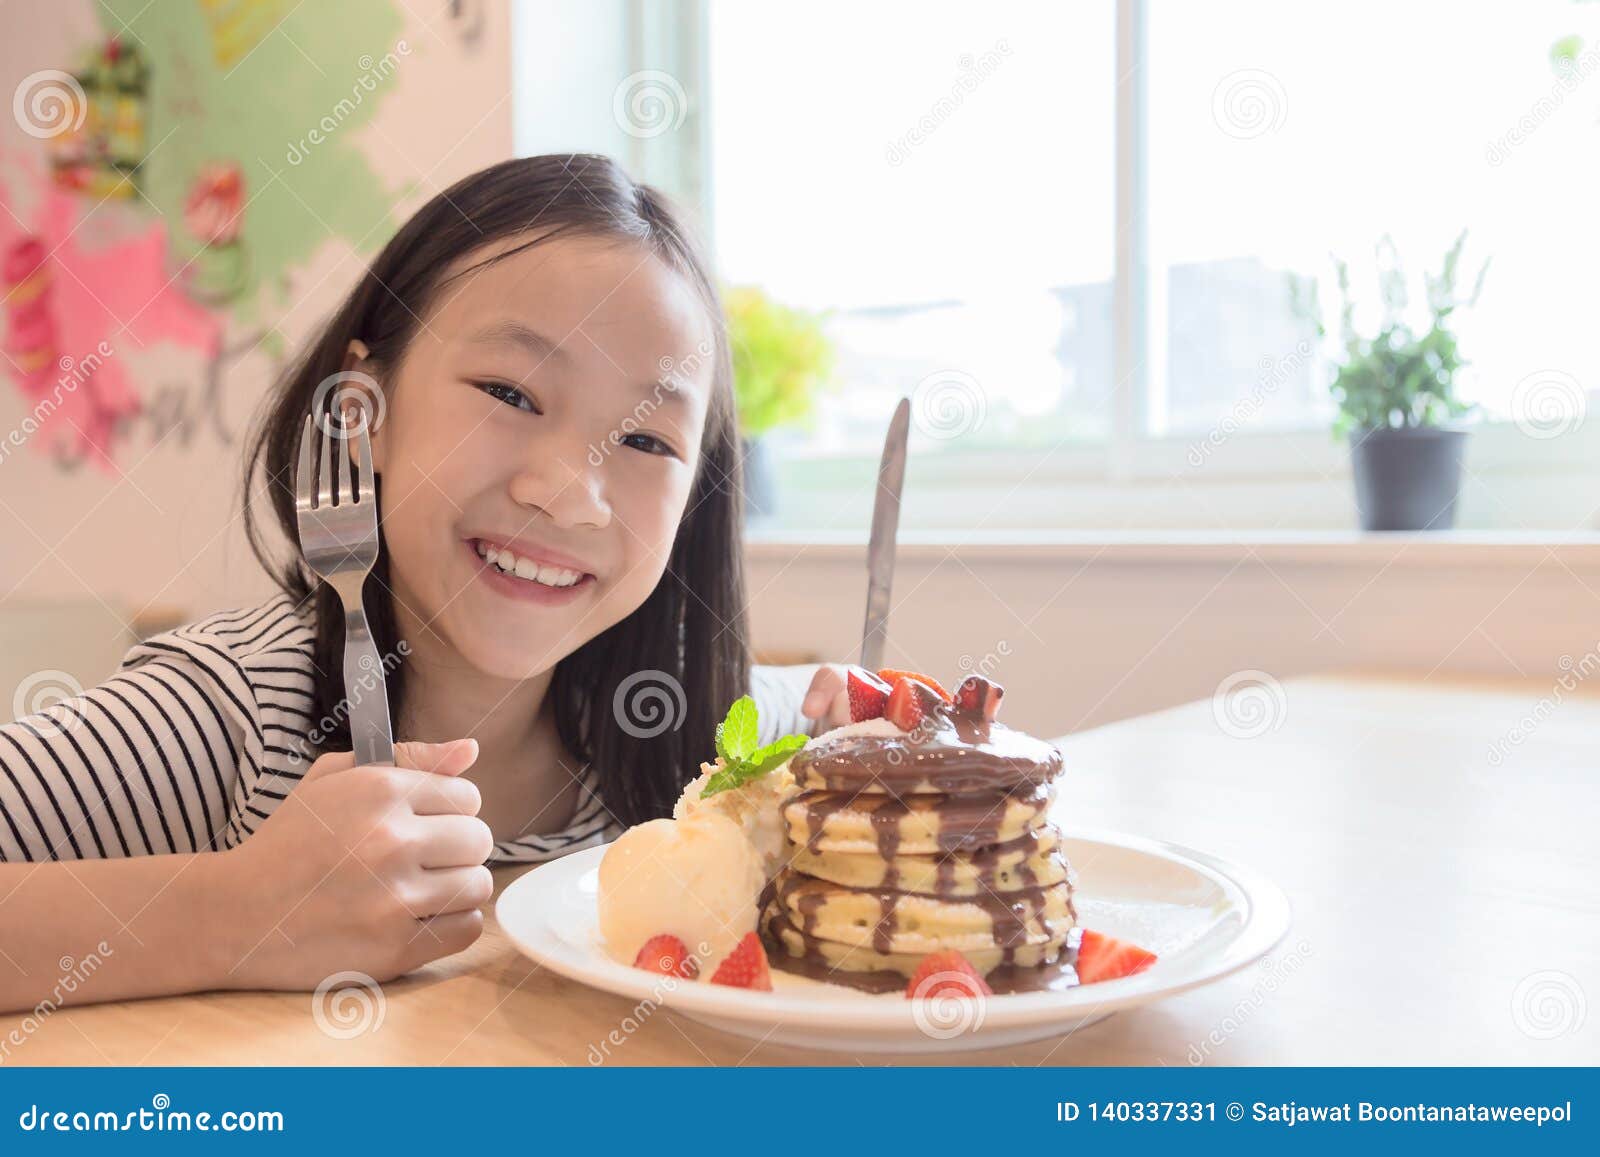 girl is smiling happily,holding a knife and fork is preparing to eat pancakes in restaurants